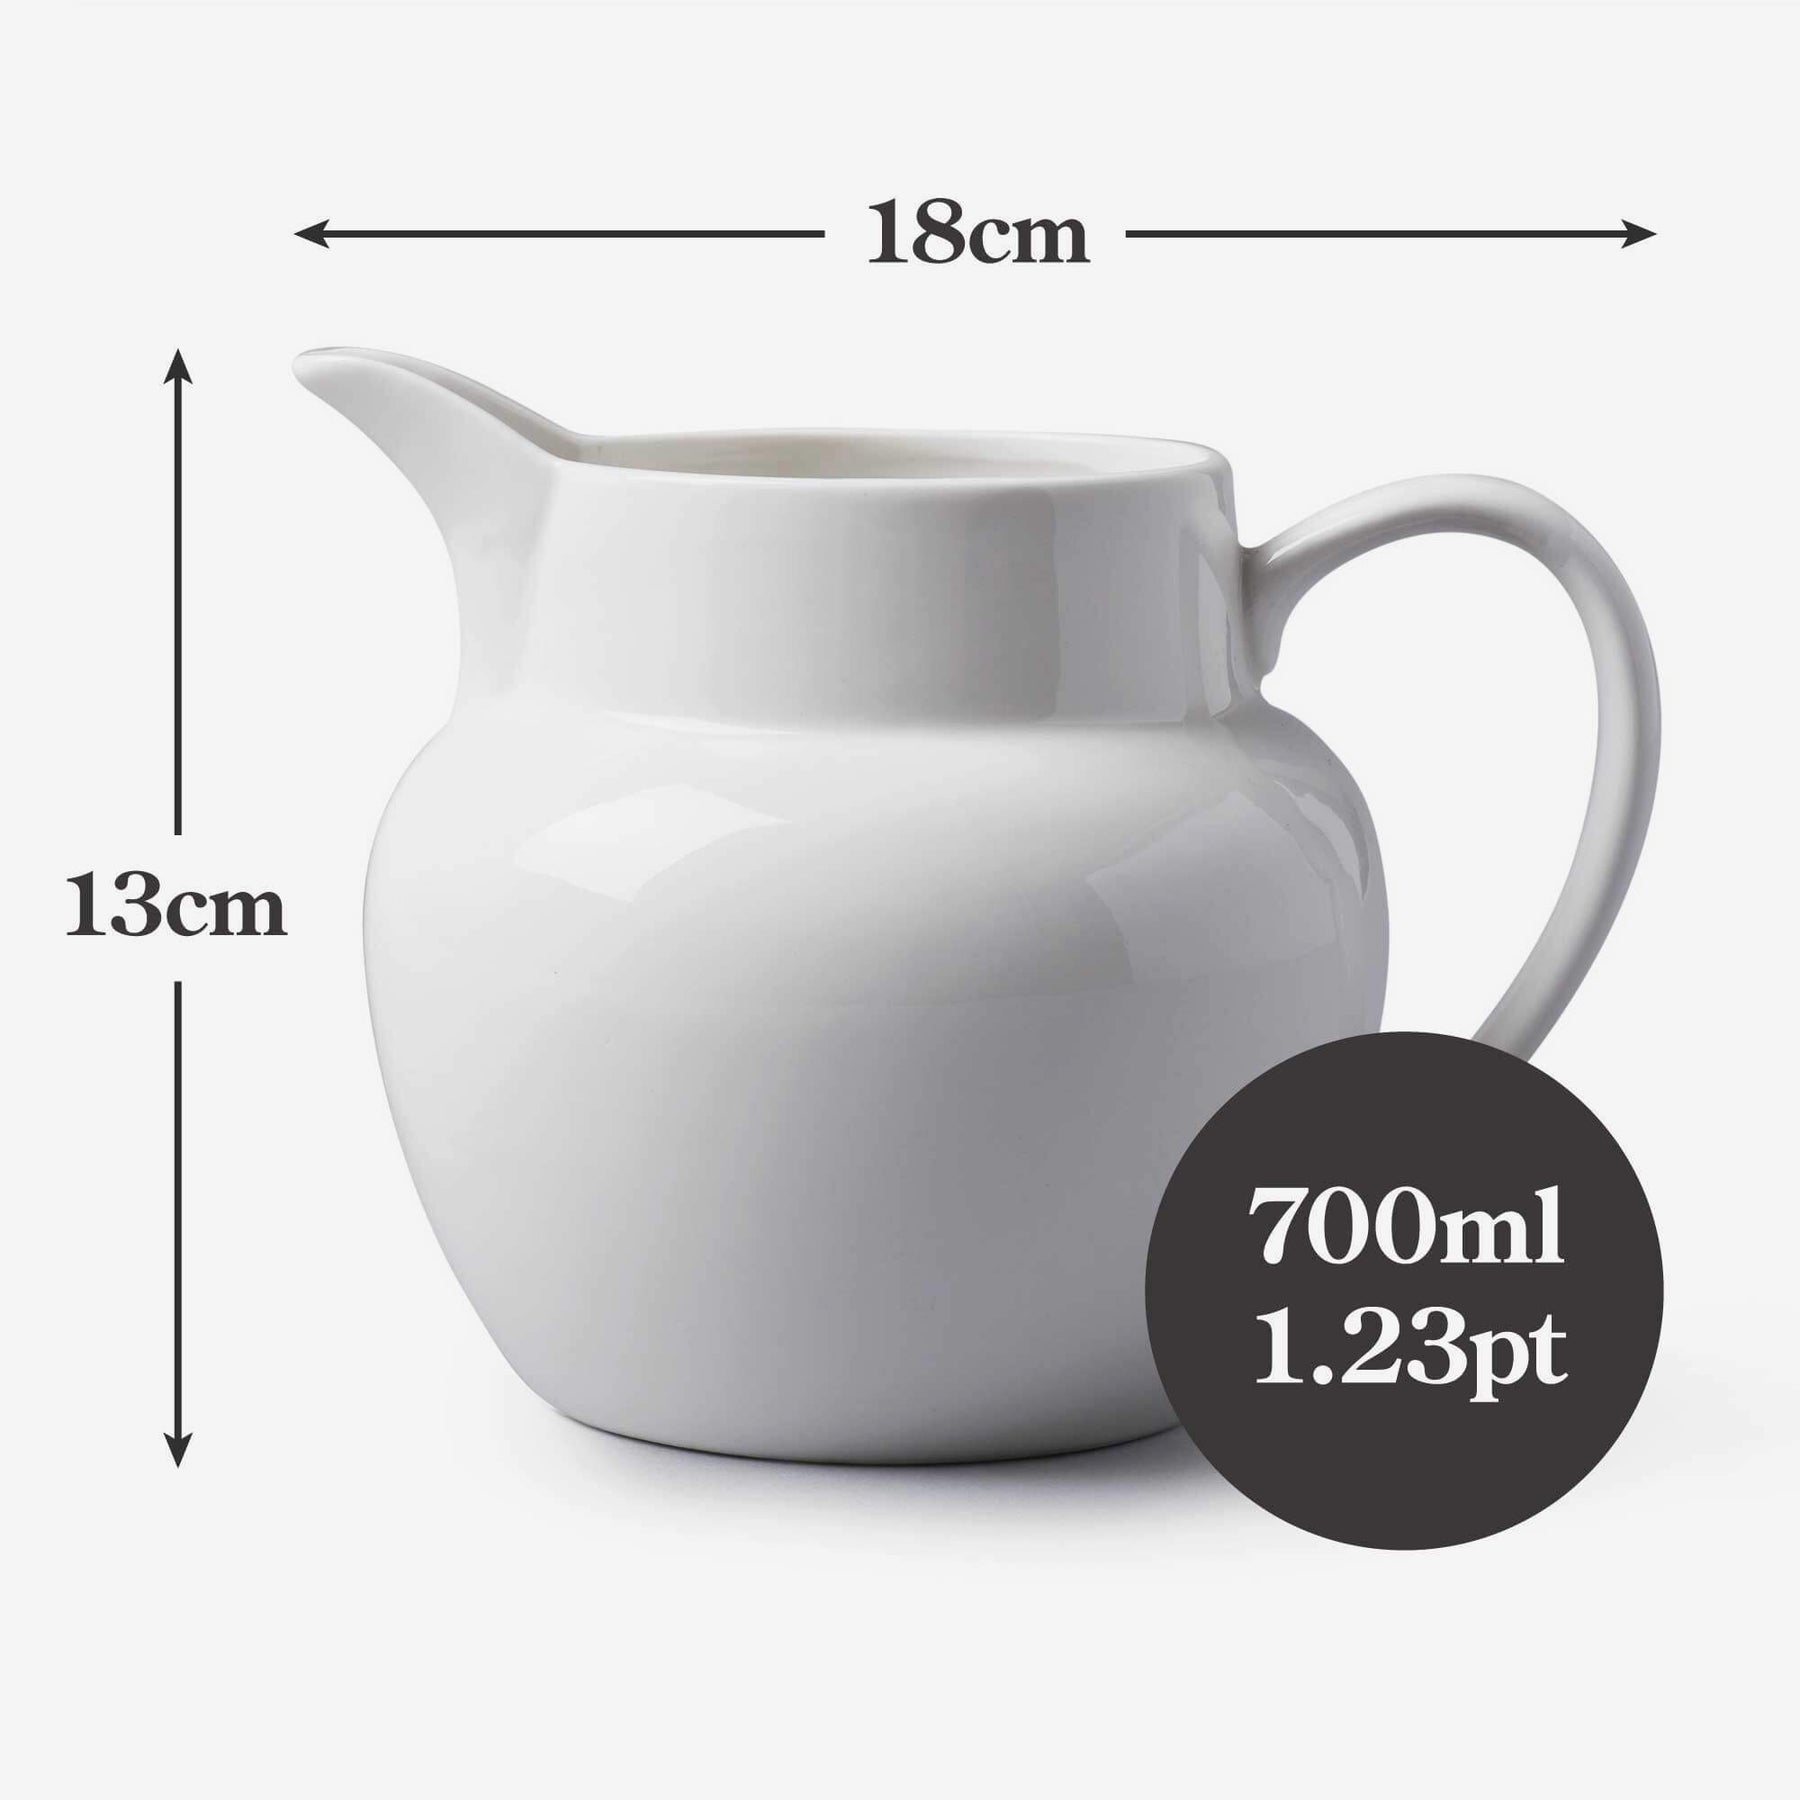 Porcelain Round Bellied Milk Jug, Available in 5 Sizes